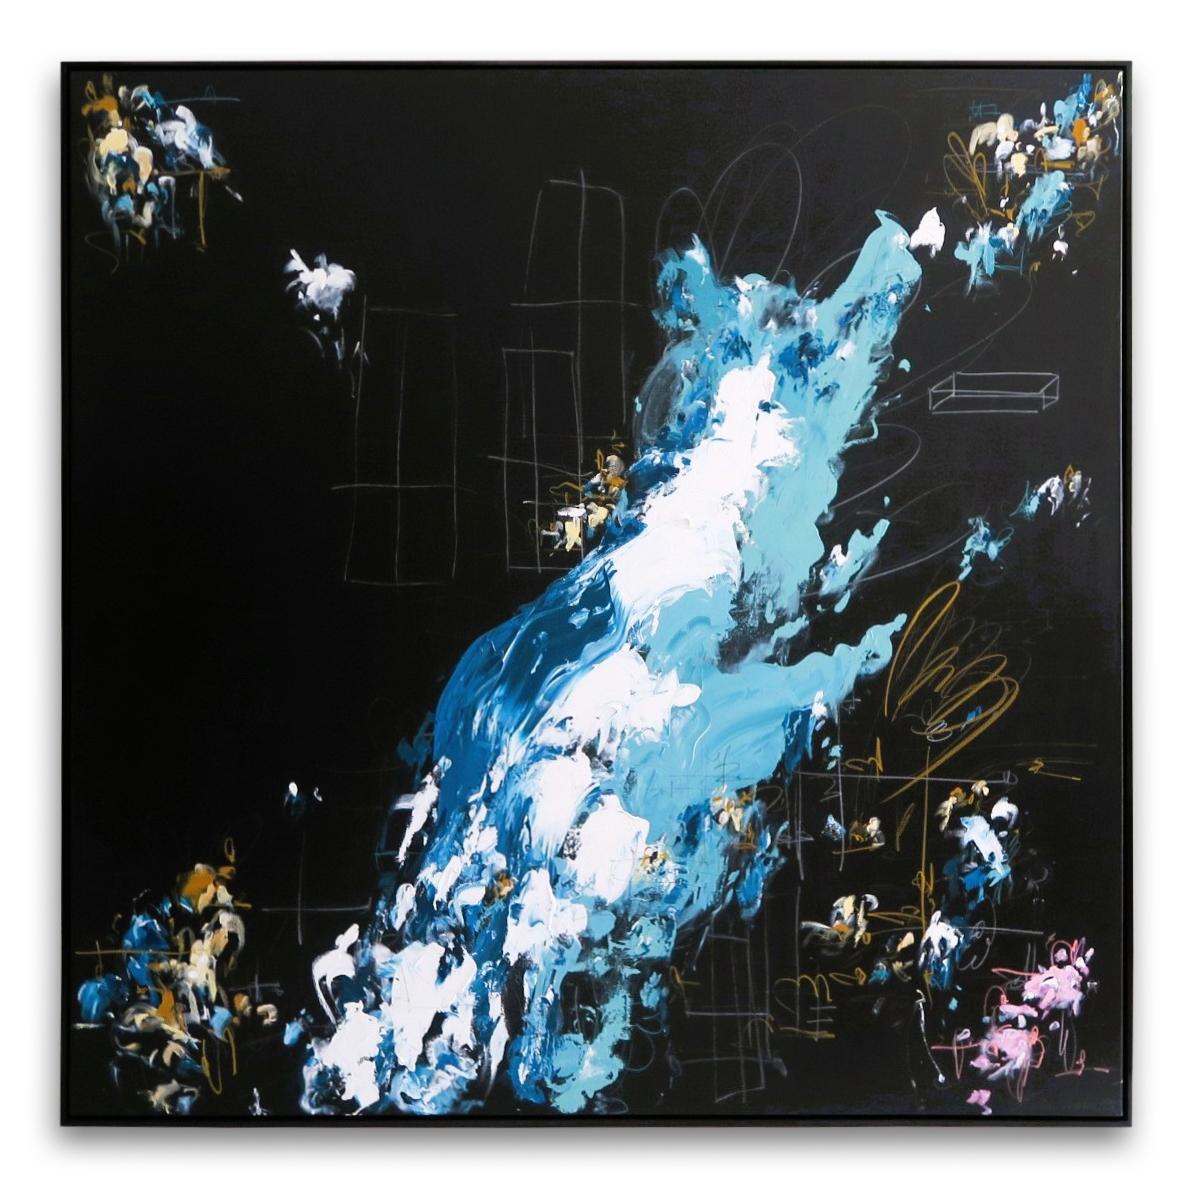 "Bodacious" Large Black, Blue, Mint, White, Raw Sienna Abstract Painting 72"x72" - Mixed Media Art by Karina Gentinetta